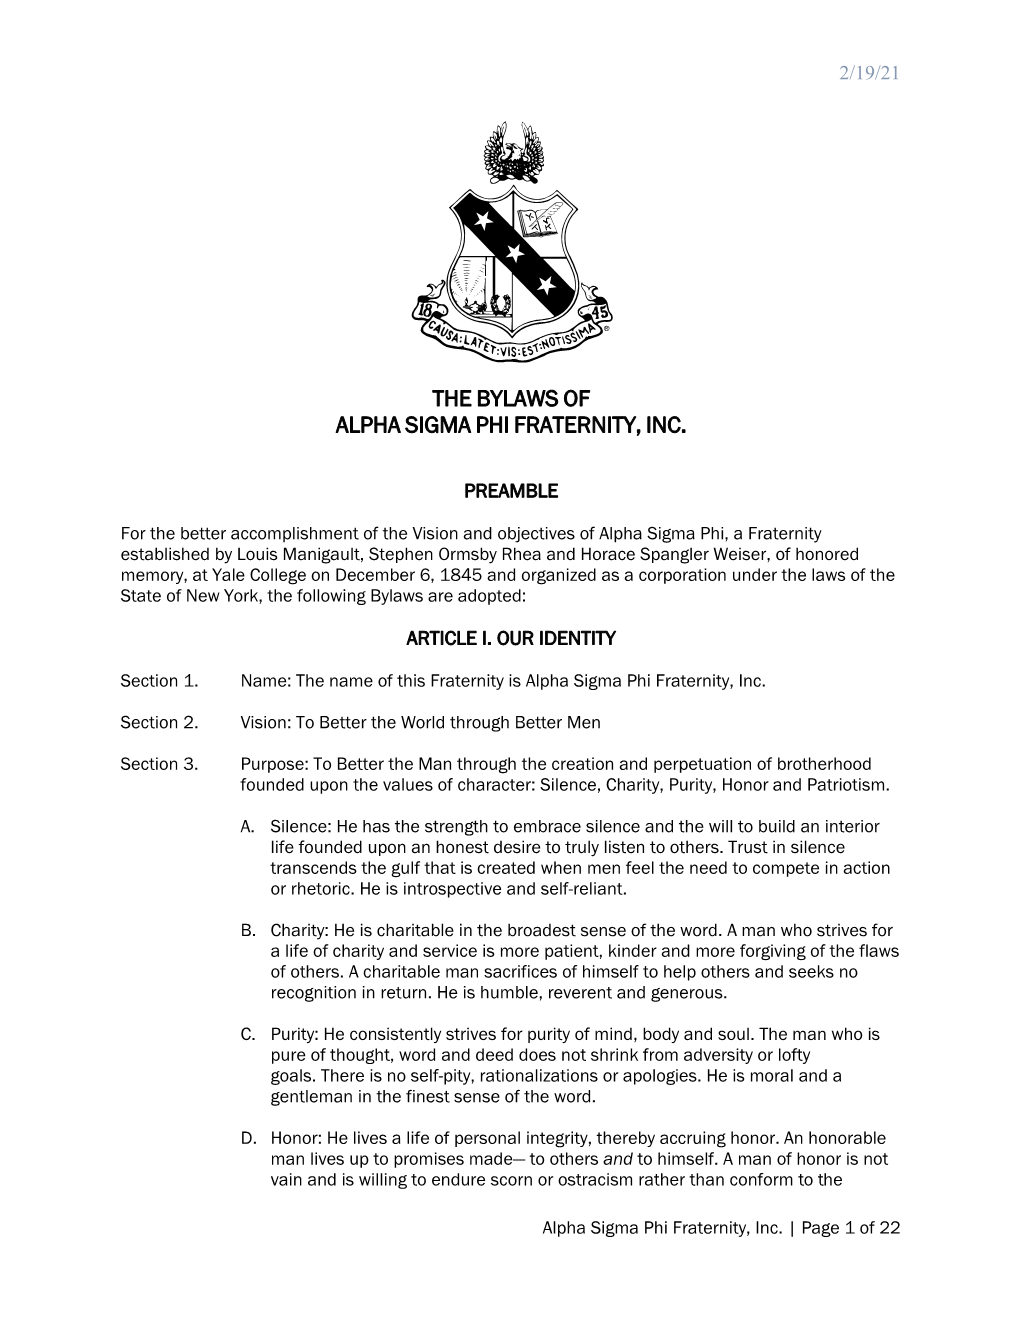 The Bylaws of Alpha Sigma Phi Fraternity, Inc